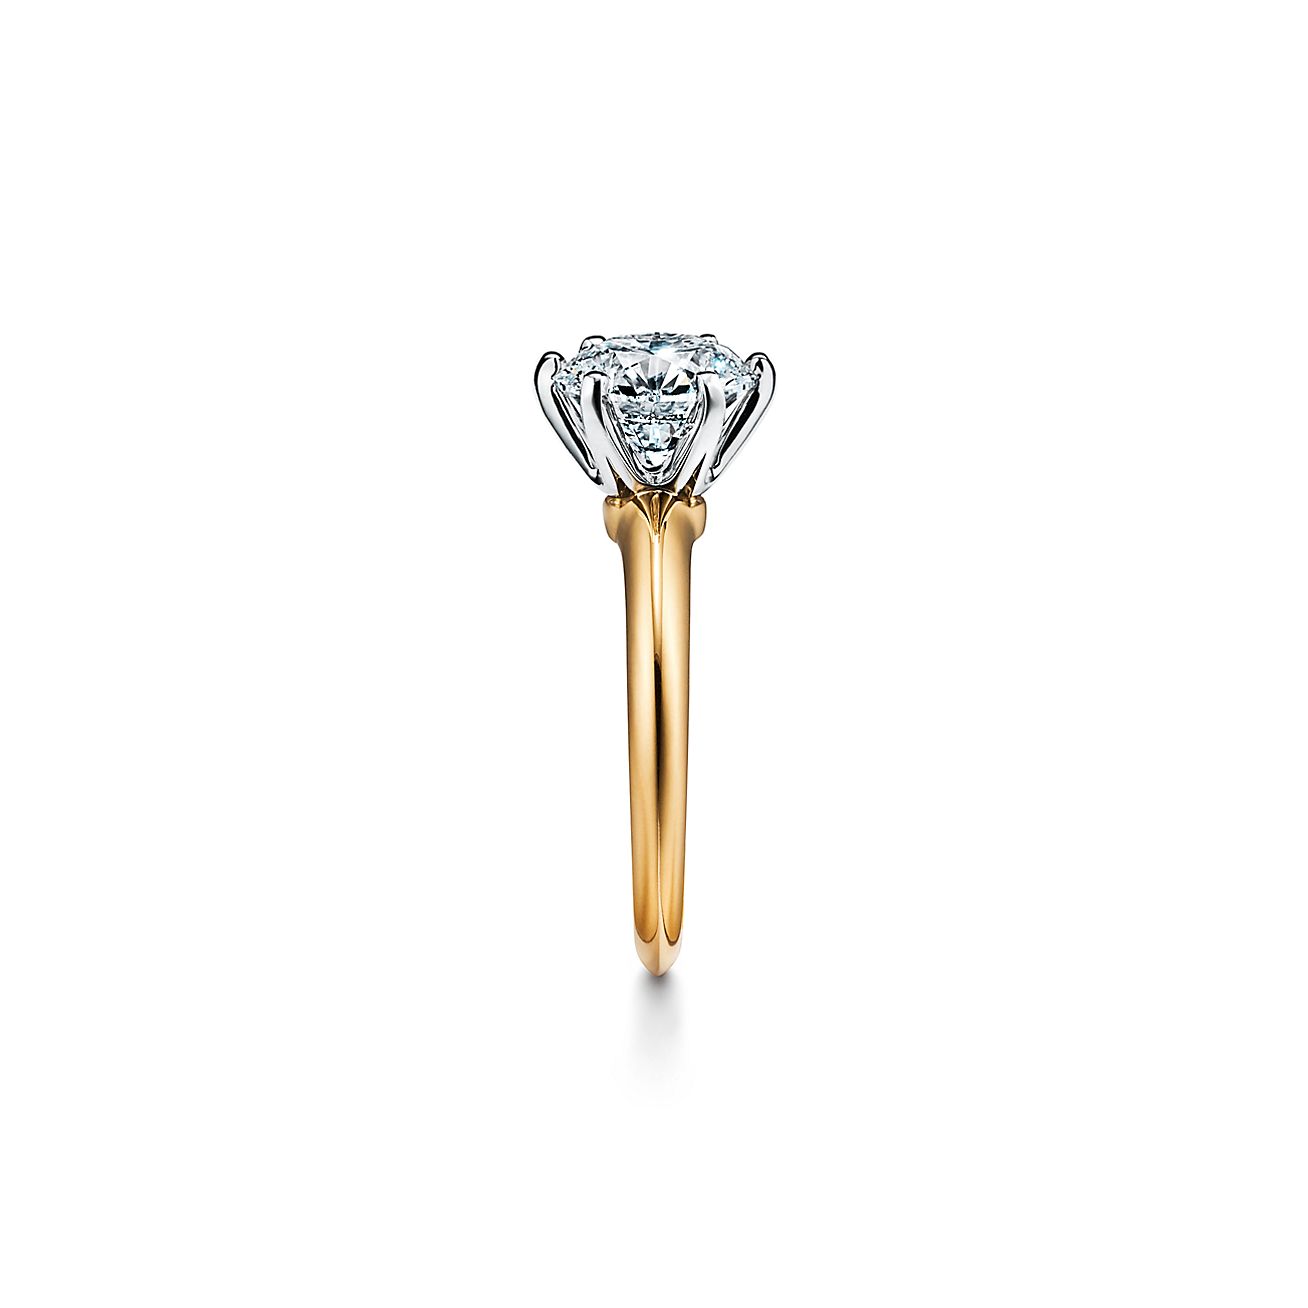 The Tiffany® Setting in 18k yellow gold 